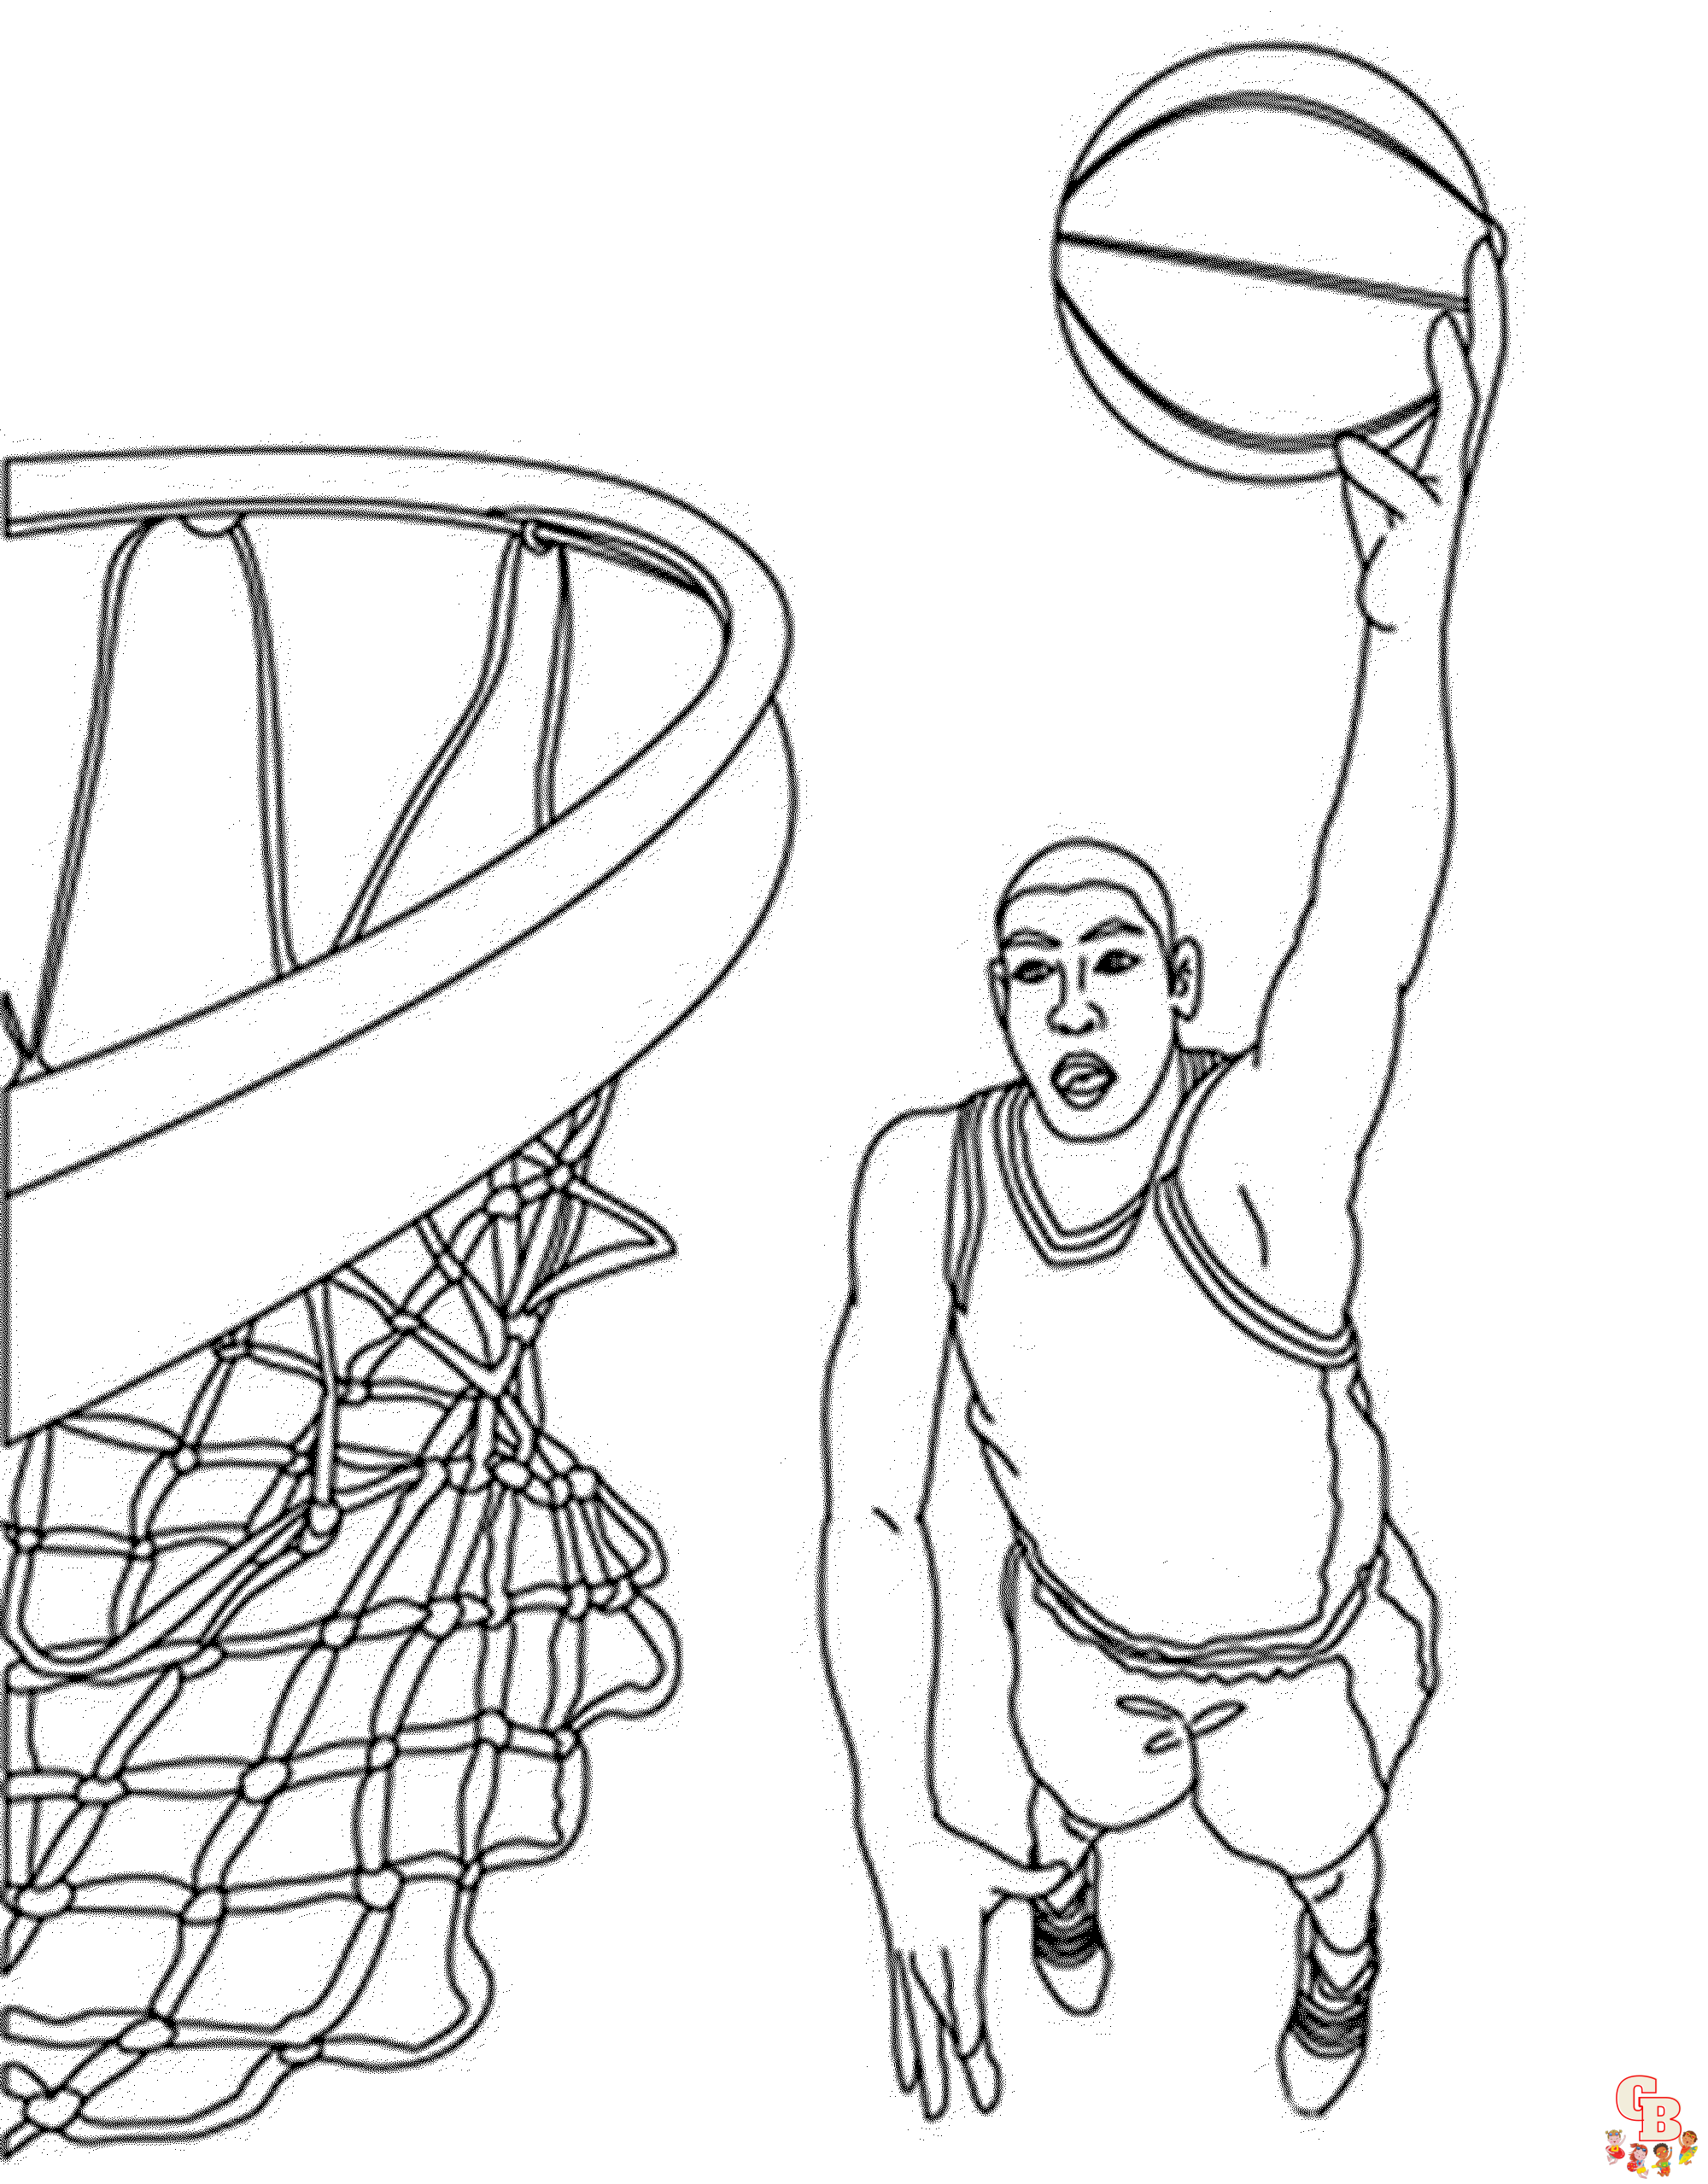 Printable Stephen Curry coloring sheets